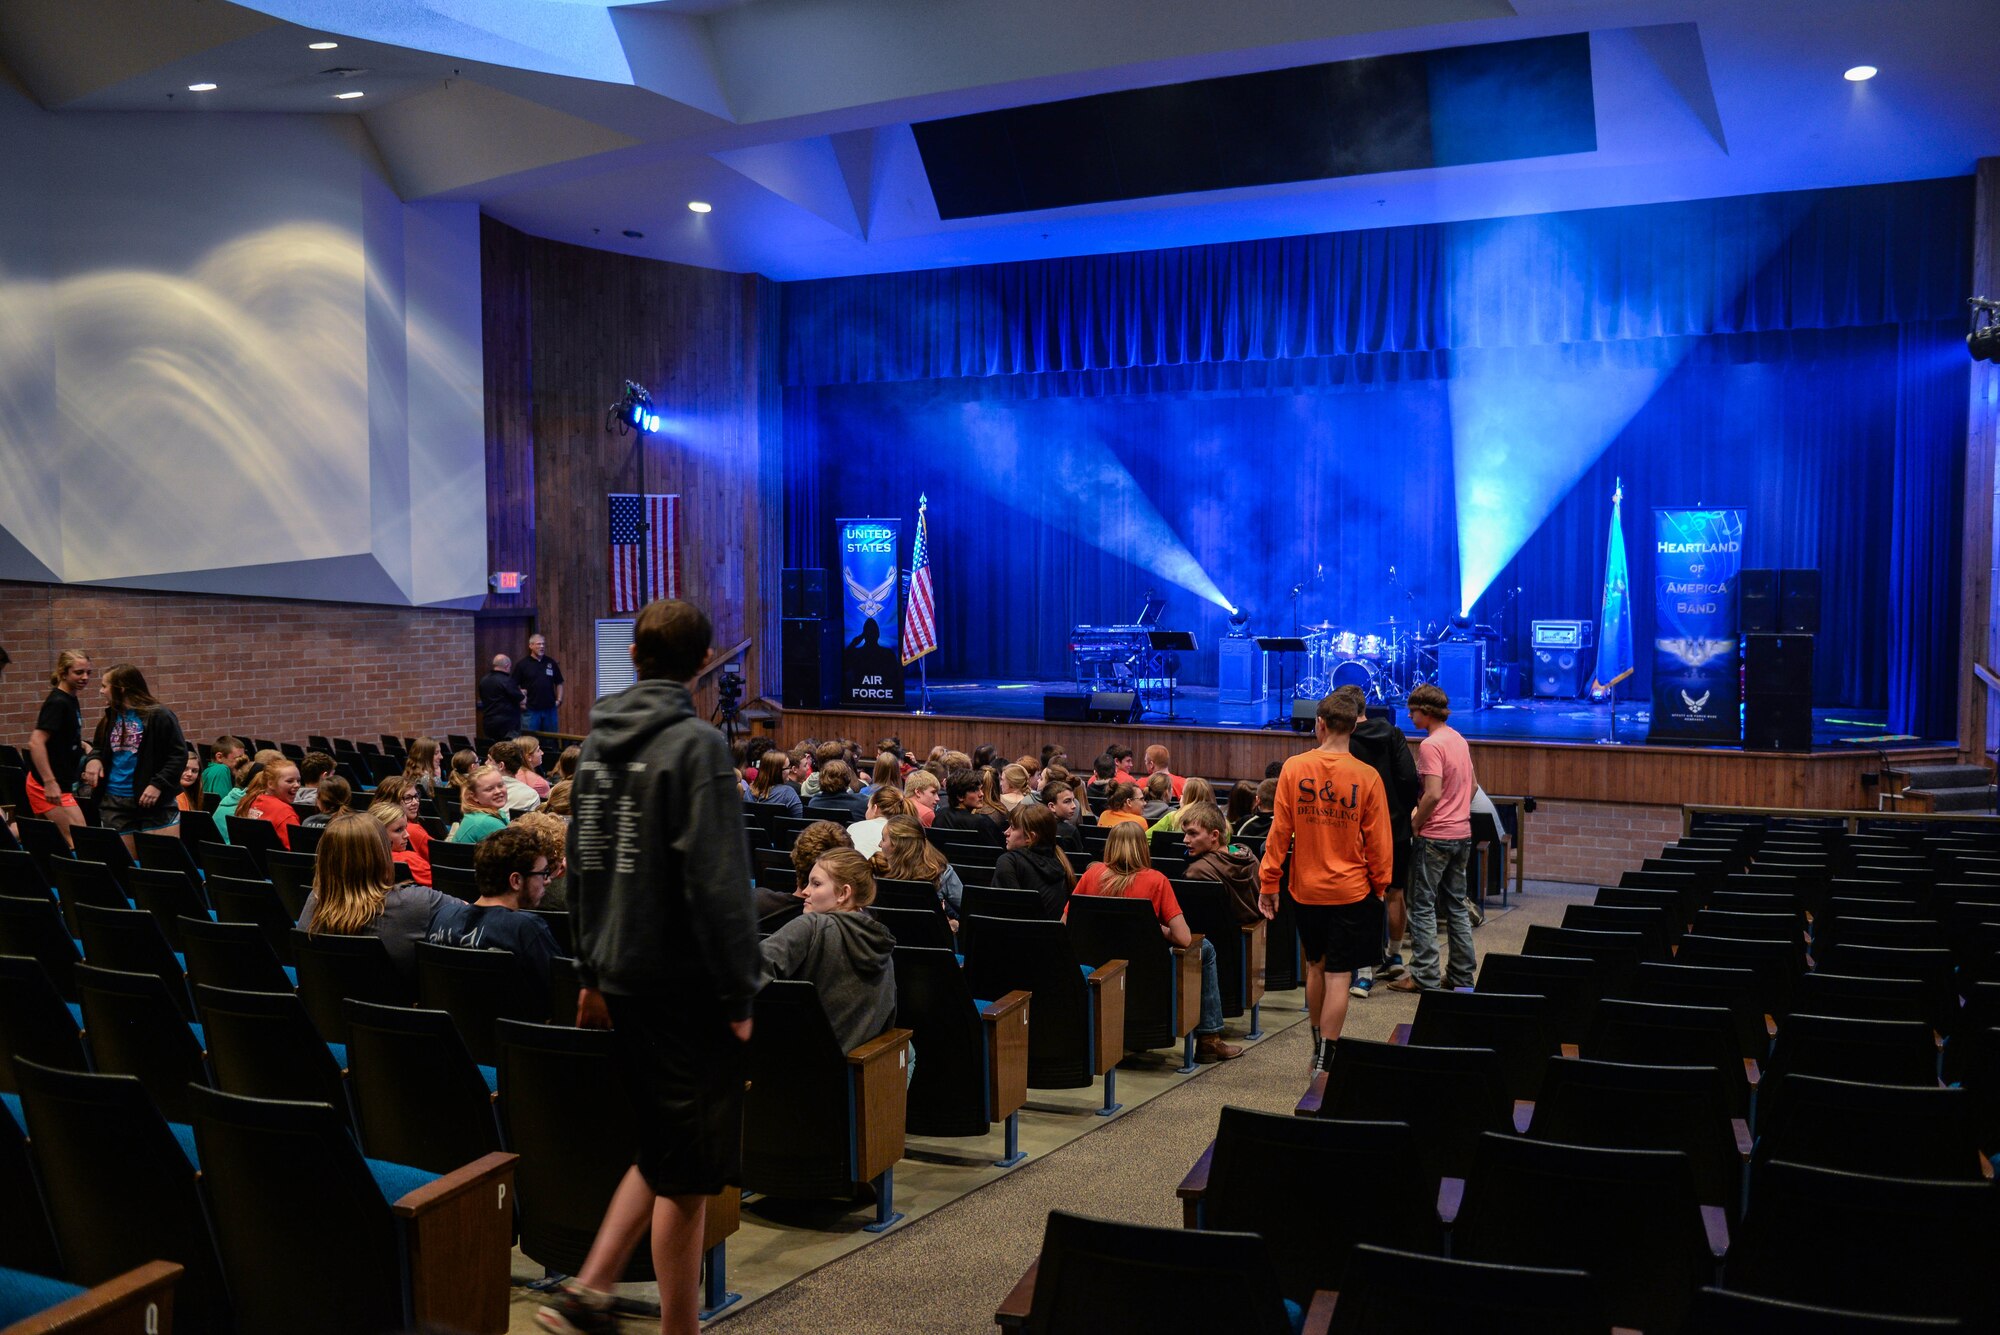 Middle and high school students from Aurora Public Schools assemble in their school auditorium to watch a performance by members of Raptor, an ensemble of the U.S. Air Force Heartland of America Band April 13, 2016, in Aurora, Neb. The Heartland of America Band is a group of Air Force professional musicians whose backgrounds include advanced degrees in music performance and whose broad mastery of musical styles range from classic to contemporary, jazz to country and pop to rock. (U.S. Air Force photo by Zachary Hada)